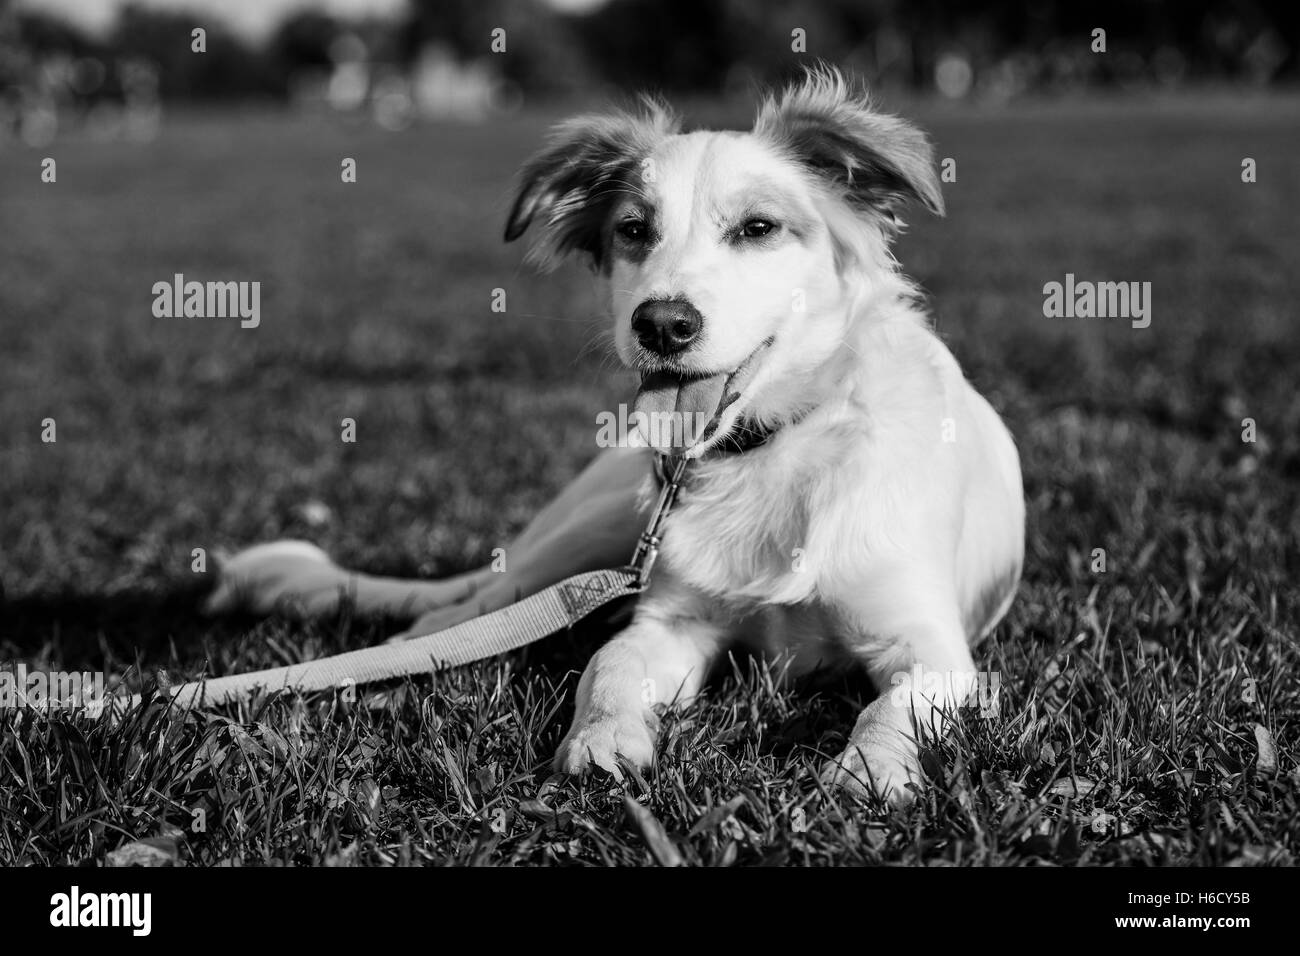 Portrait of a mixed breed dog sitting in an urban park. Stock Photo